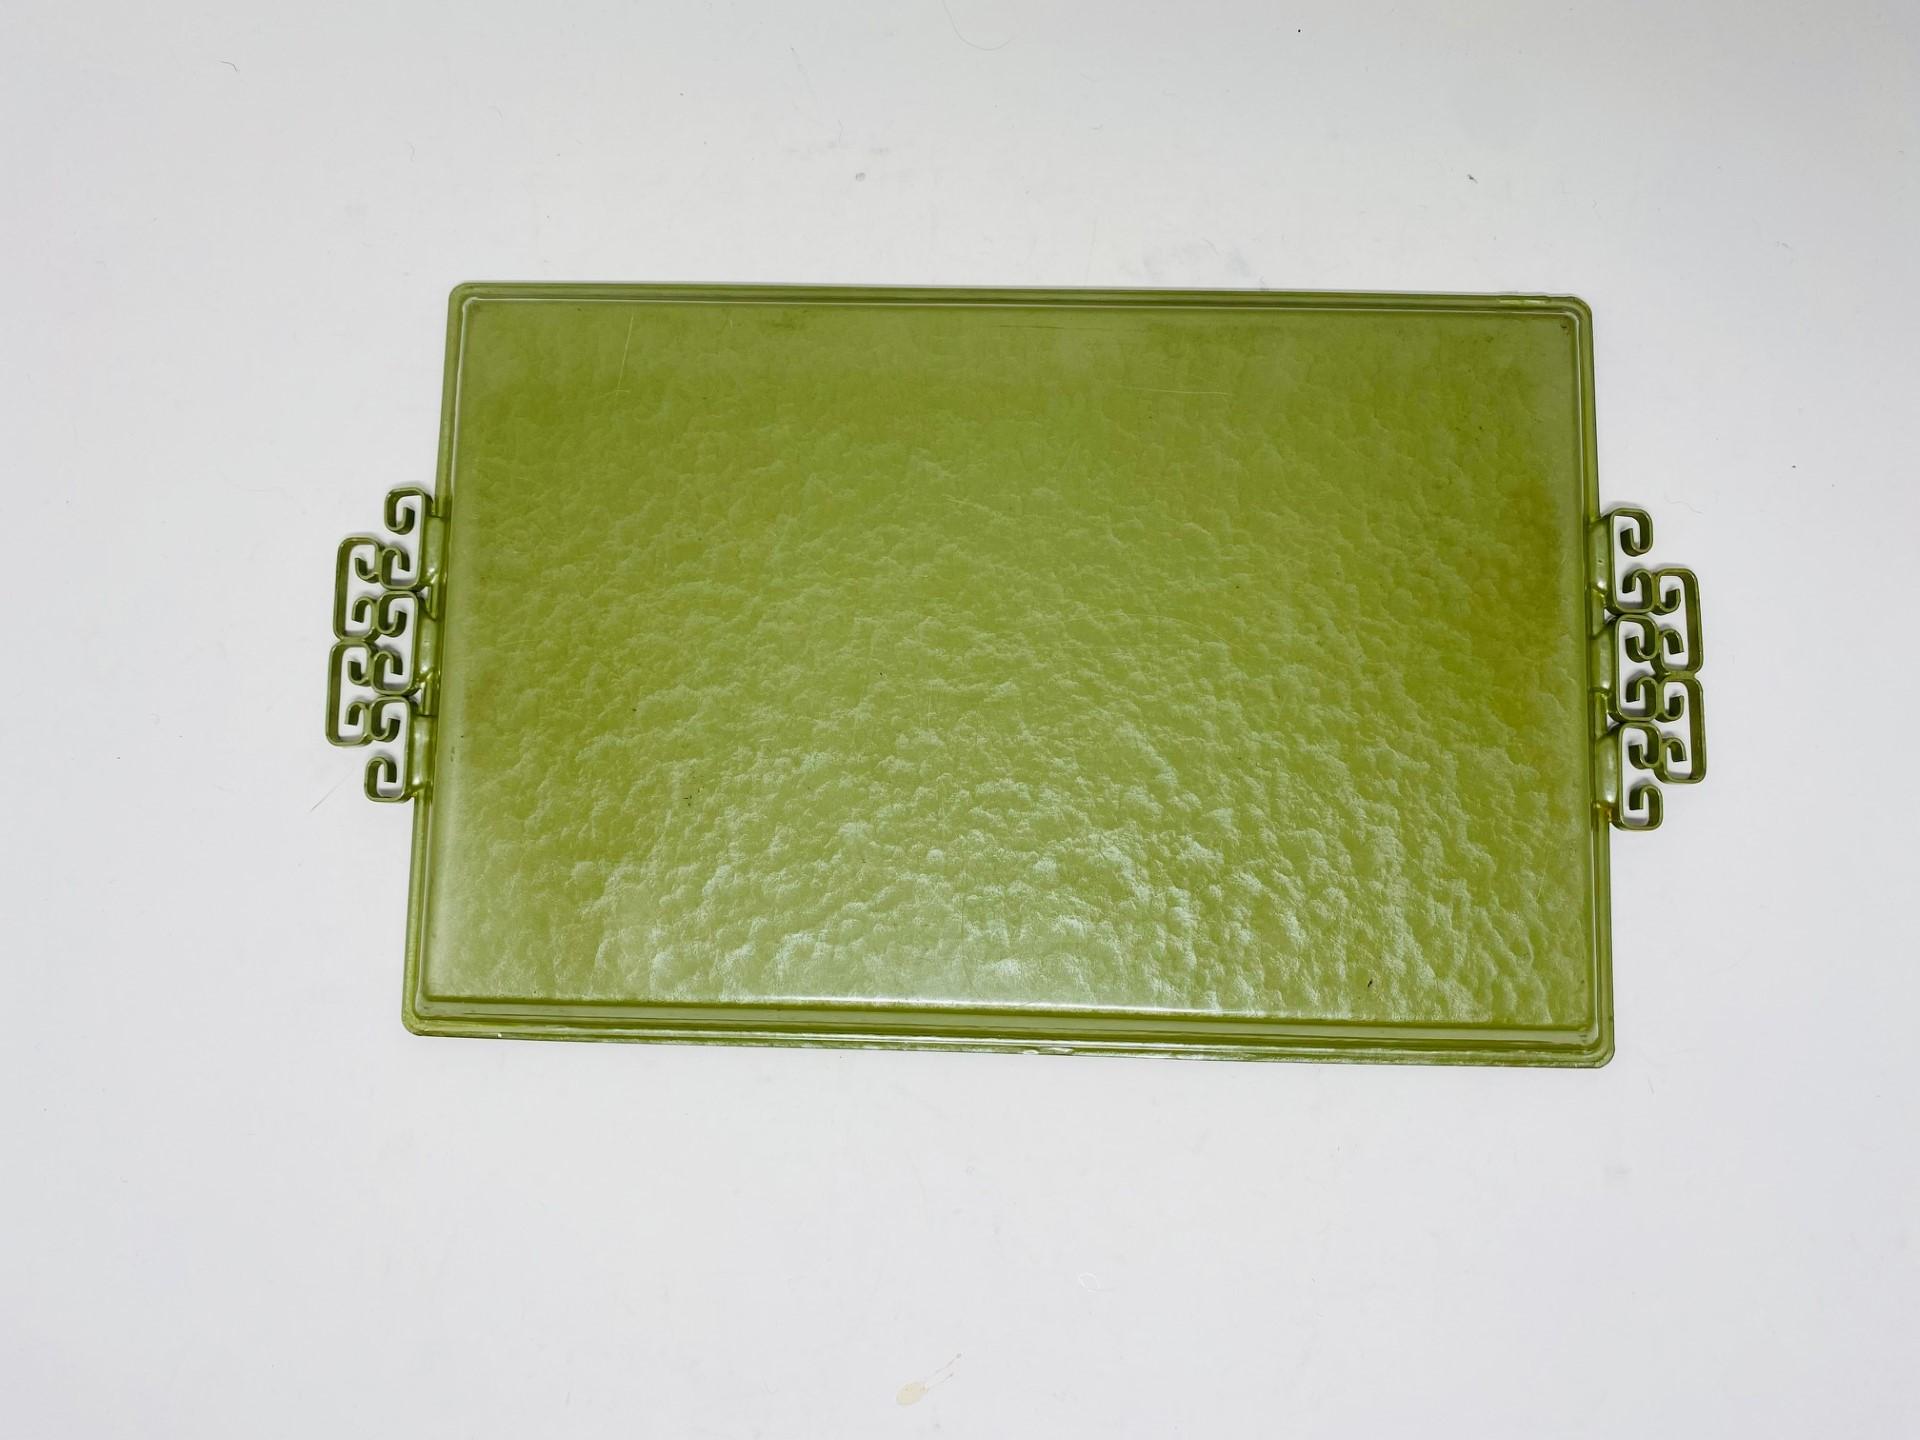 American Vintage Mid Century Kyes Moire’ Glaze Brass and Enamel Green Tray 1960s For Sale